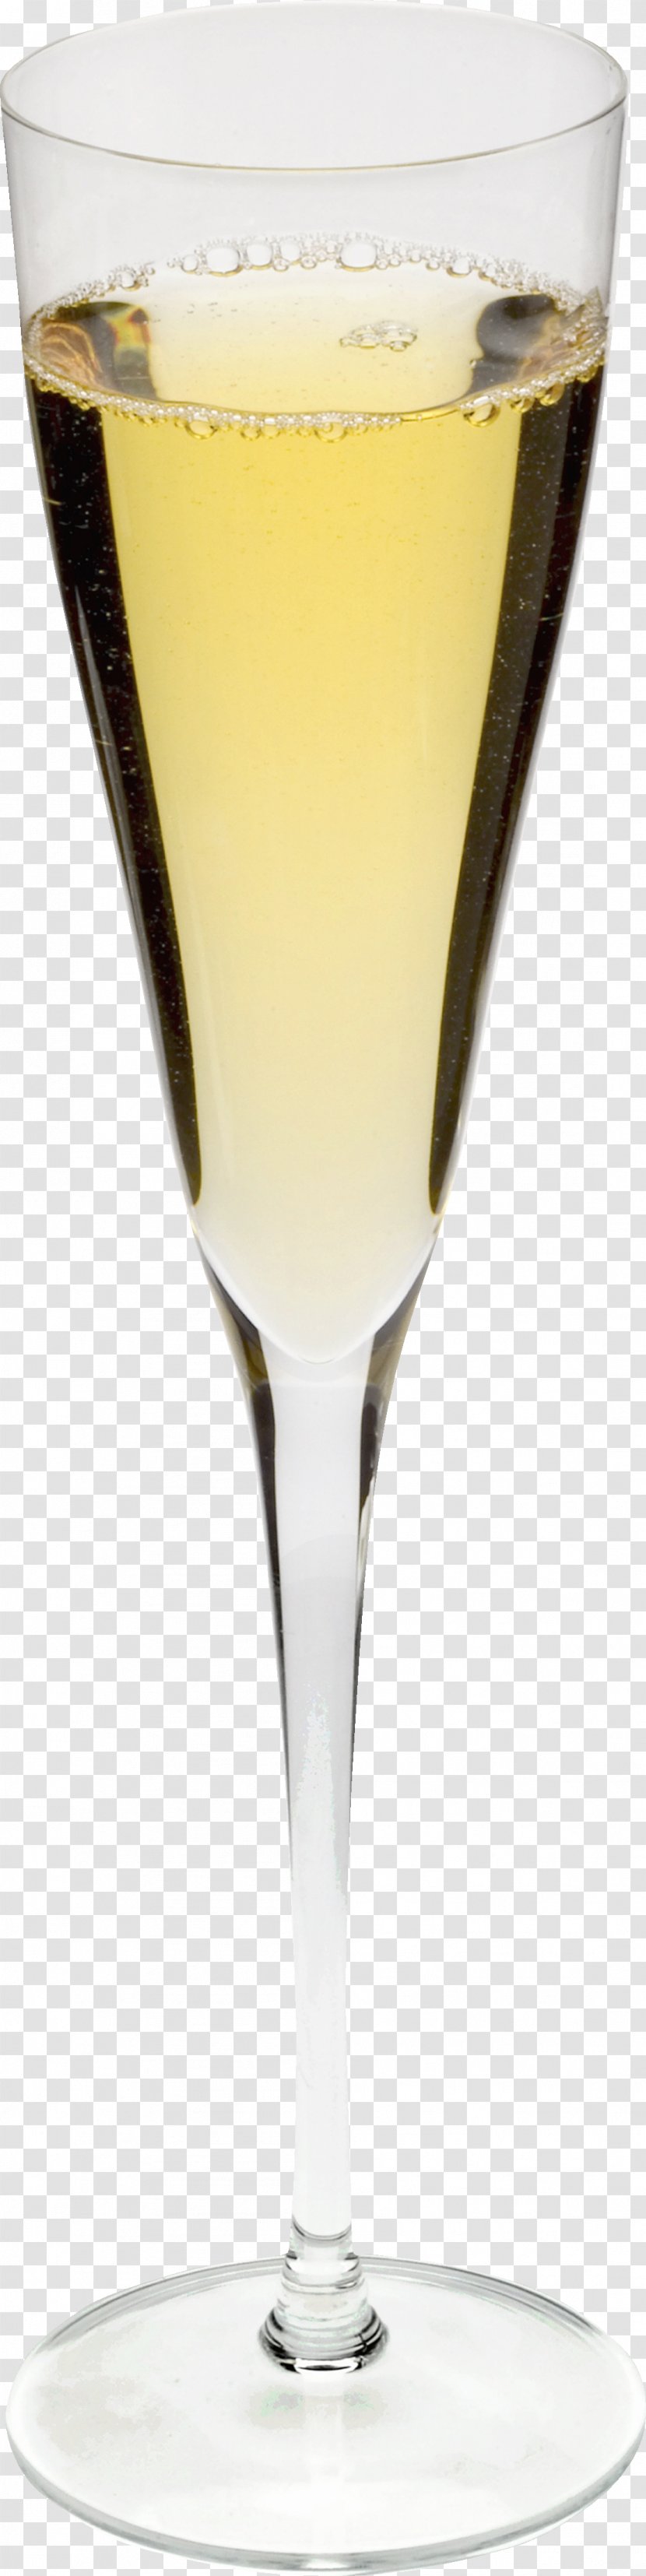 Wine Glass Cocktail Champagne - Classic - Cup Transparent PNG